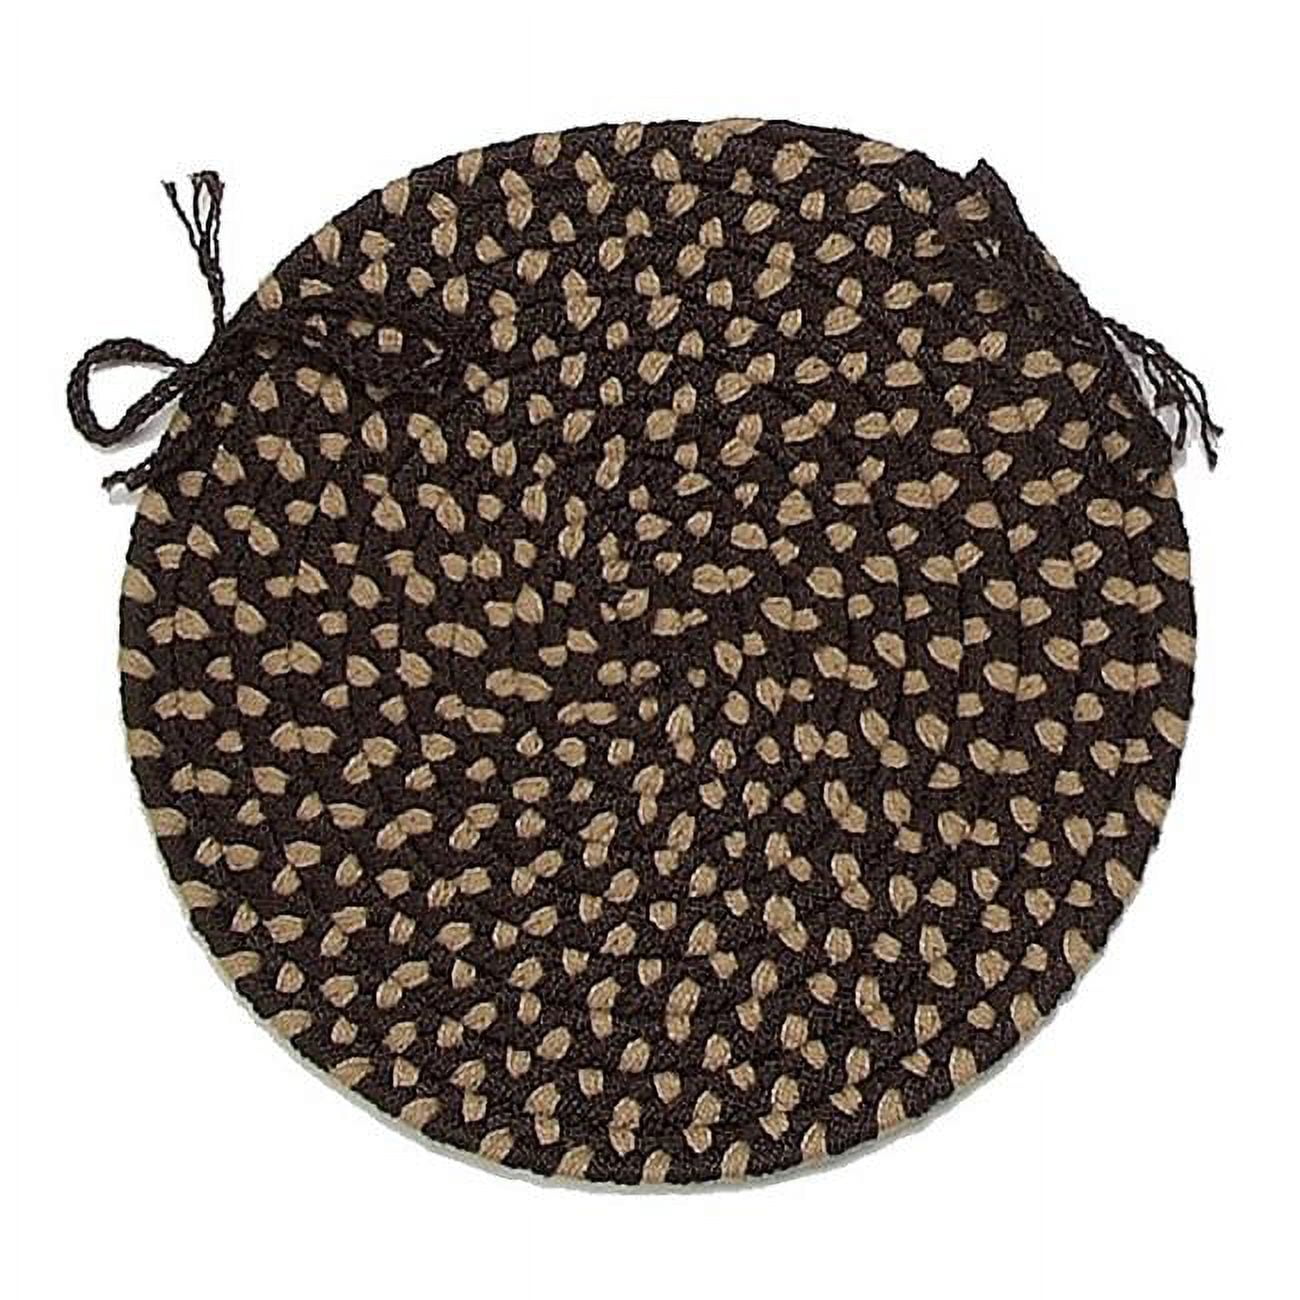 Bf72r036x036 3 Ft. Brook Farm Round Area Rug, Natural Earth